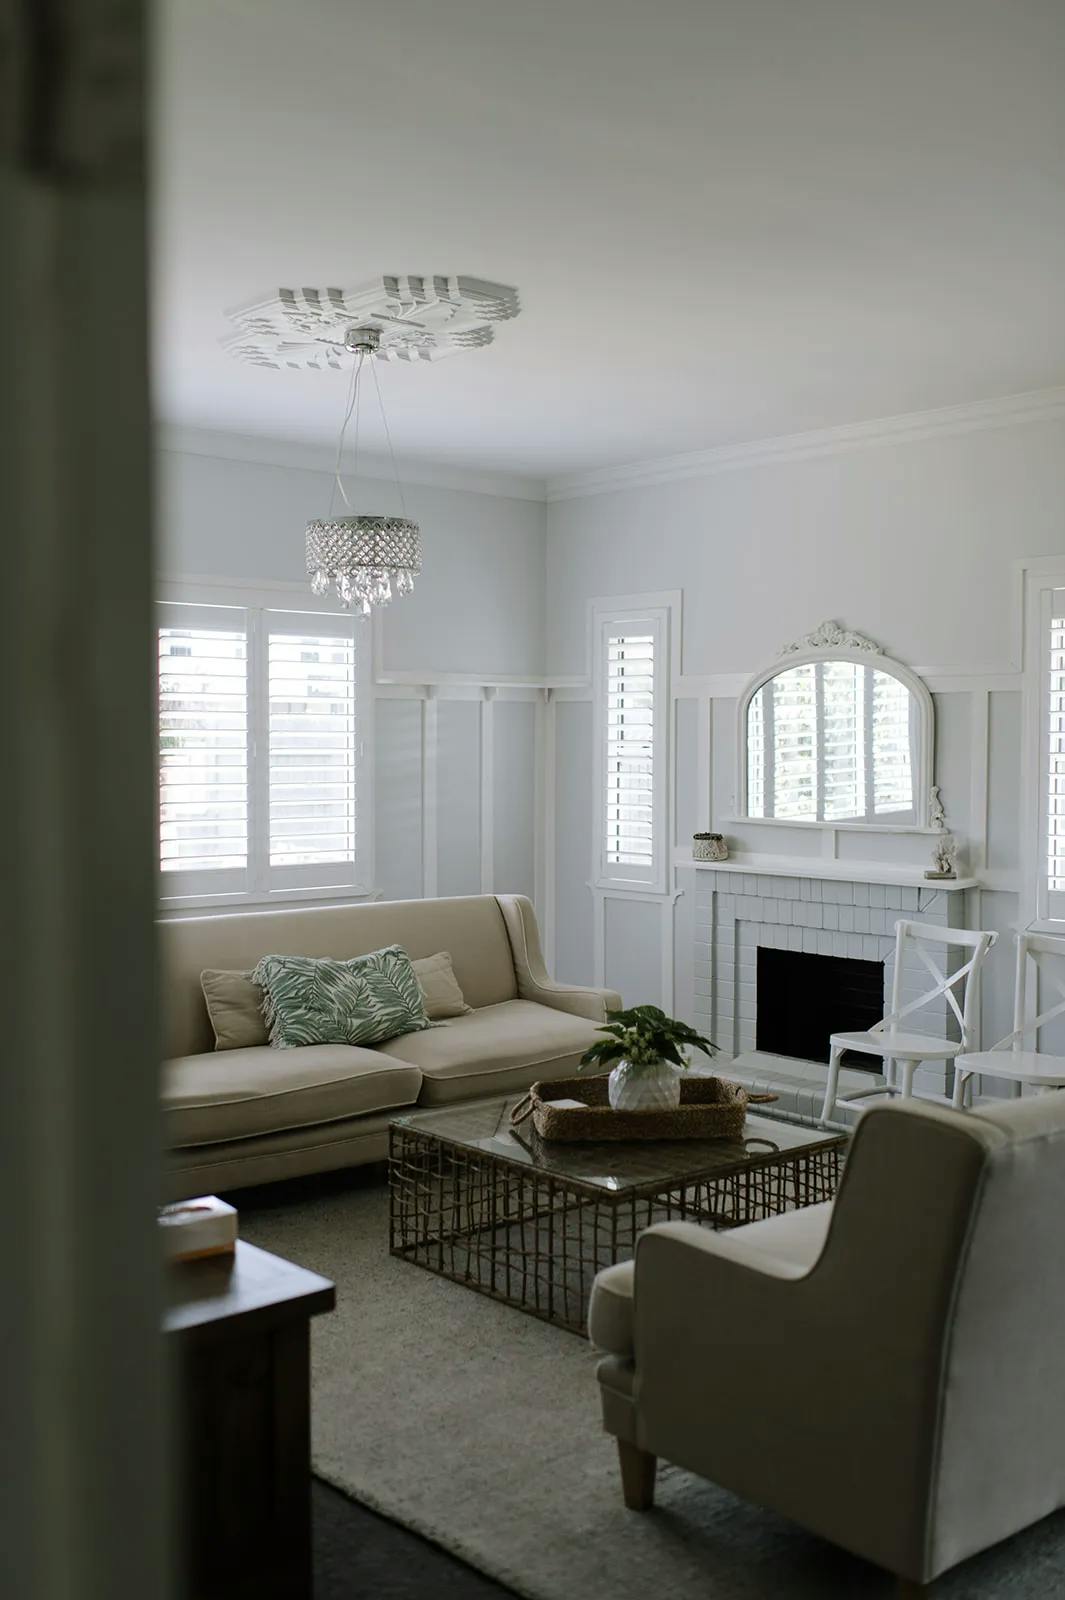 A cozy living room with white walls and a large window with white shutters. The room features a beige sofa, a white armchair, a glass coffee table with a plant, a fireplace with a mirror above it, and a decorative chandelier on the ceiling.